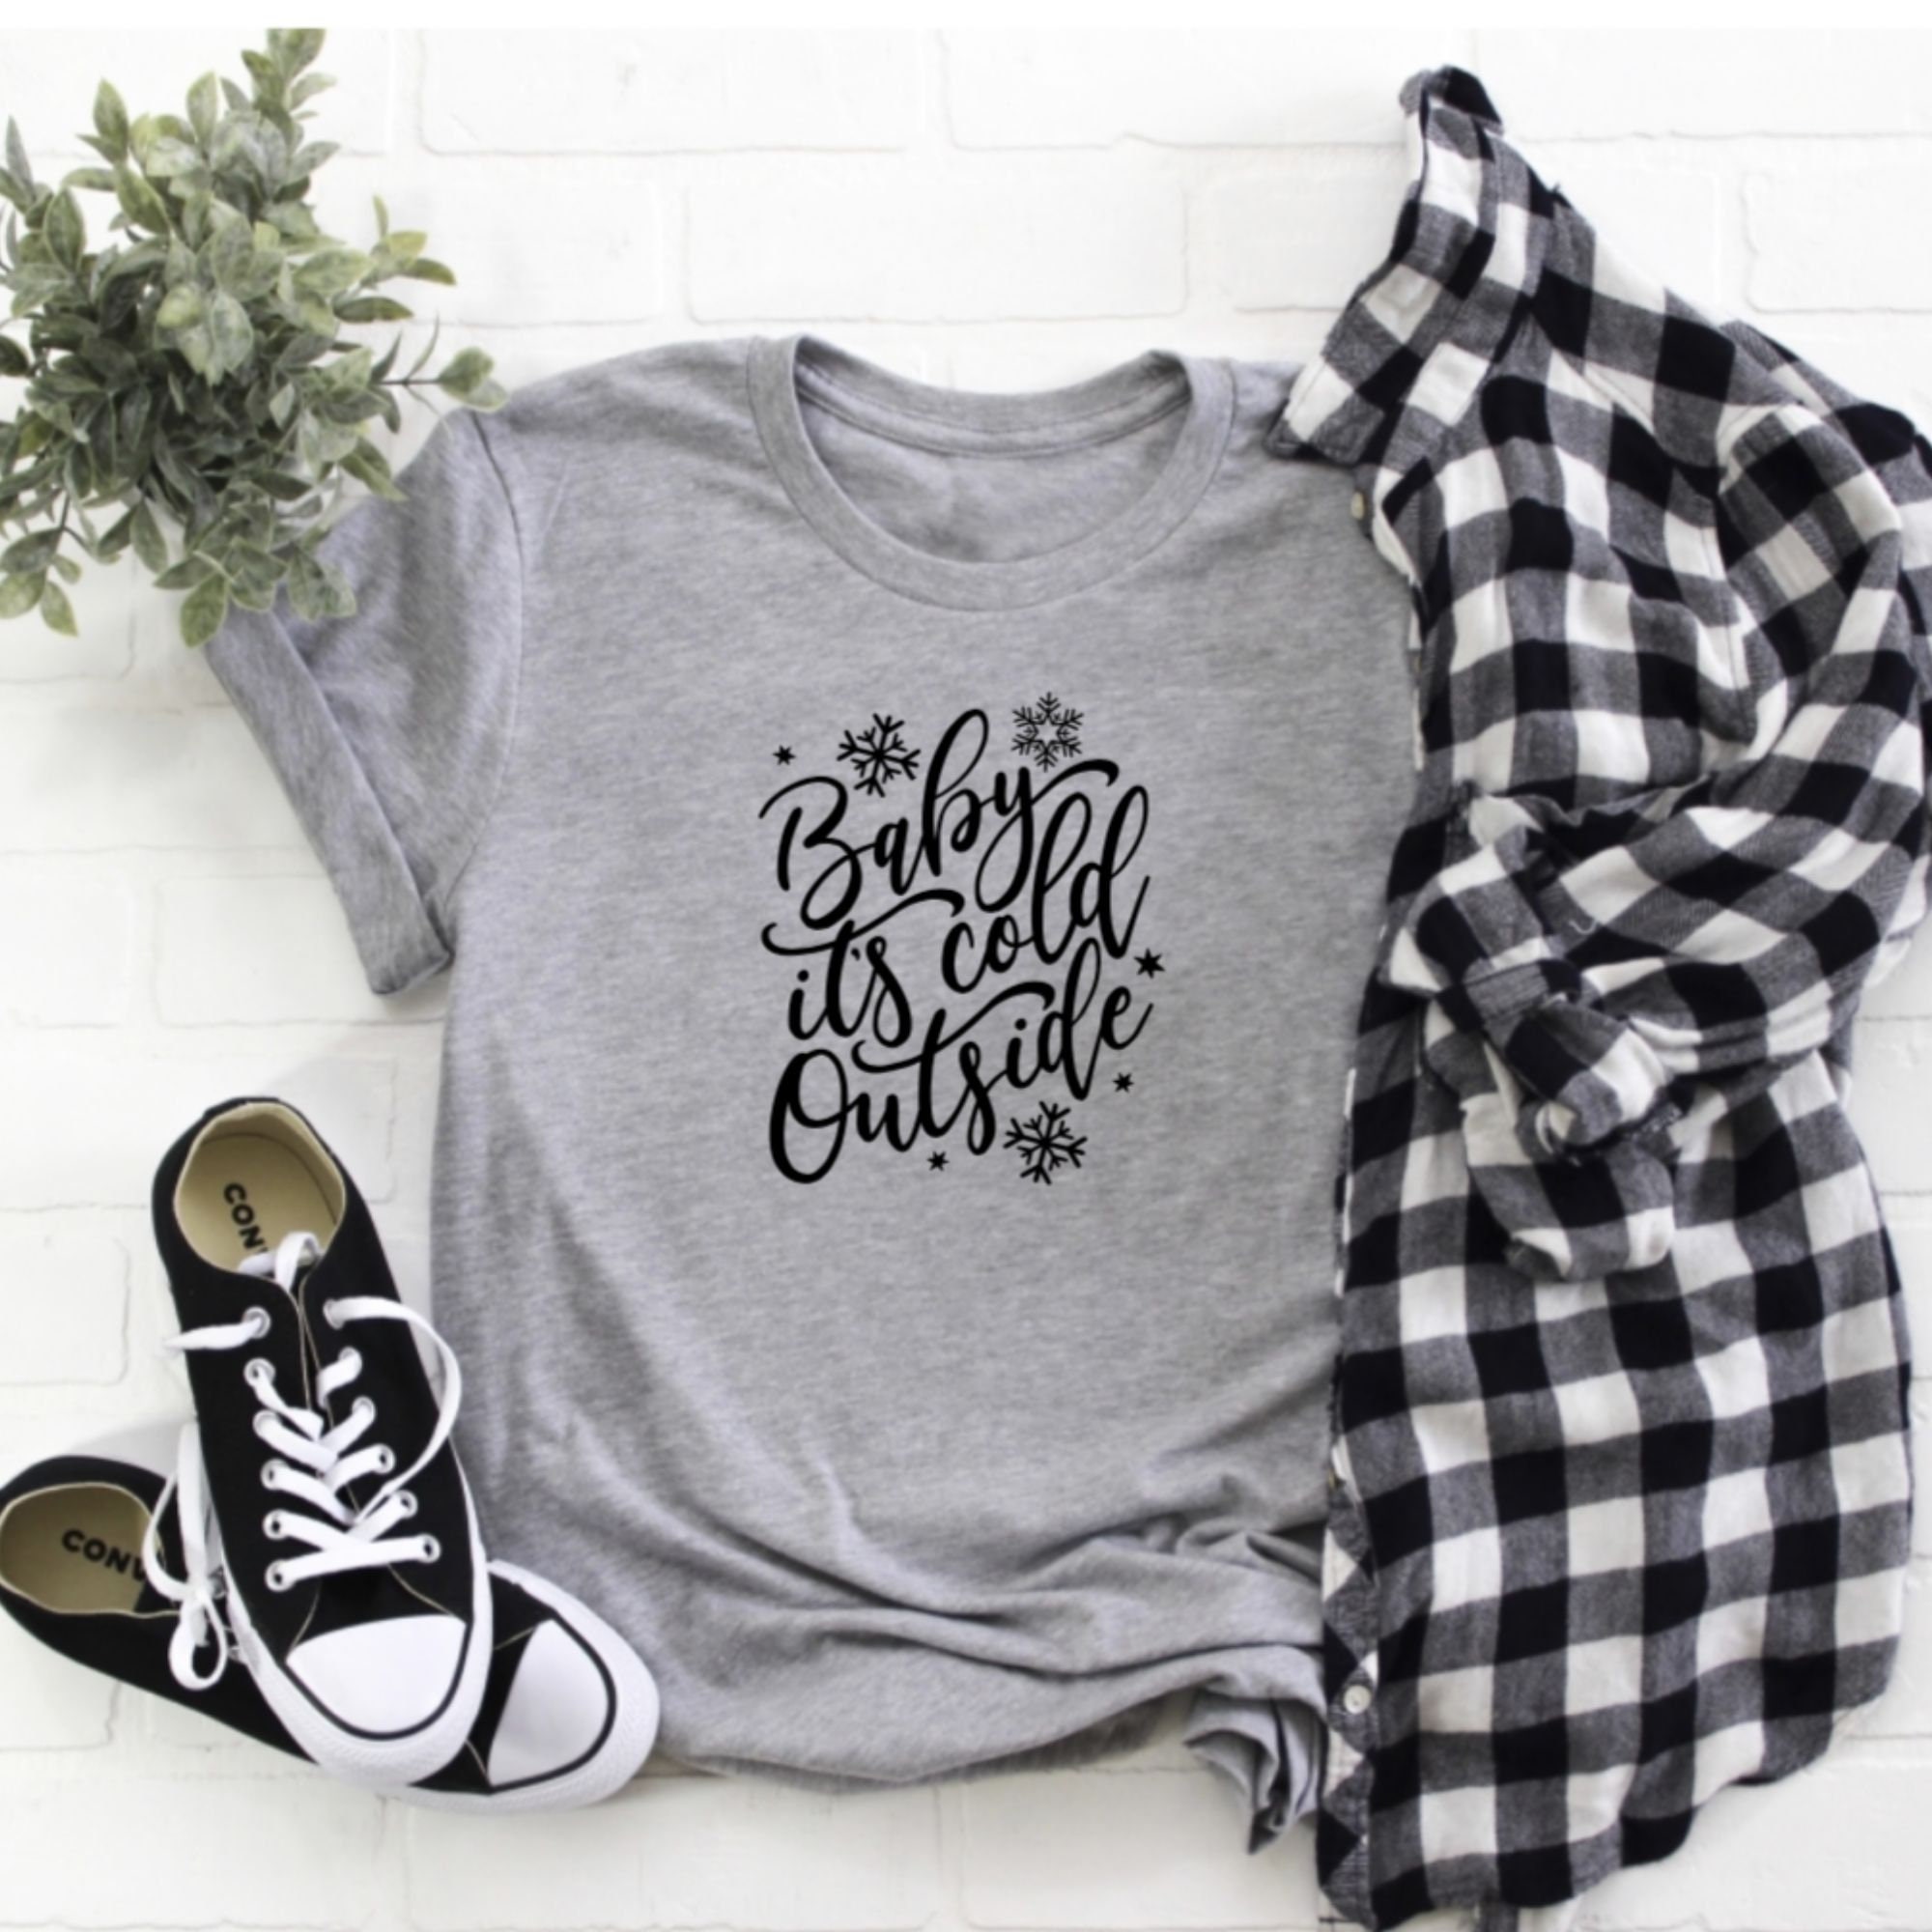 Christmas Shirts / Baby It's Cold Outside Shirt / - Etsy